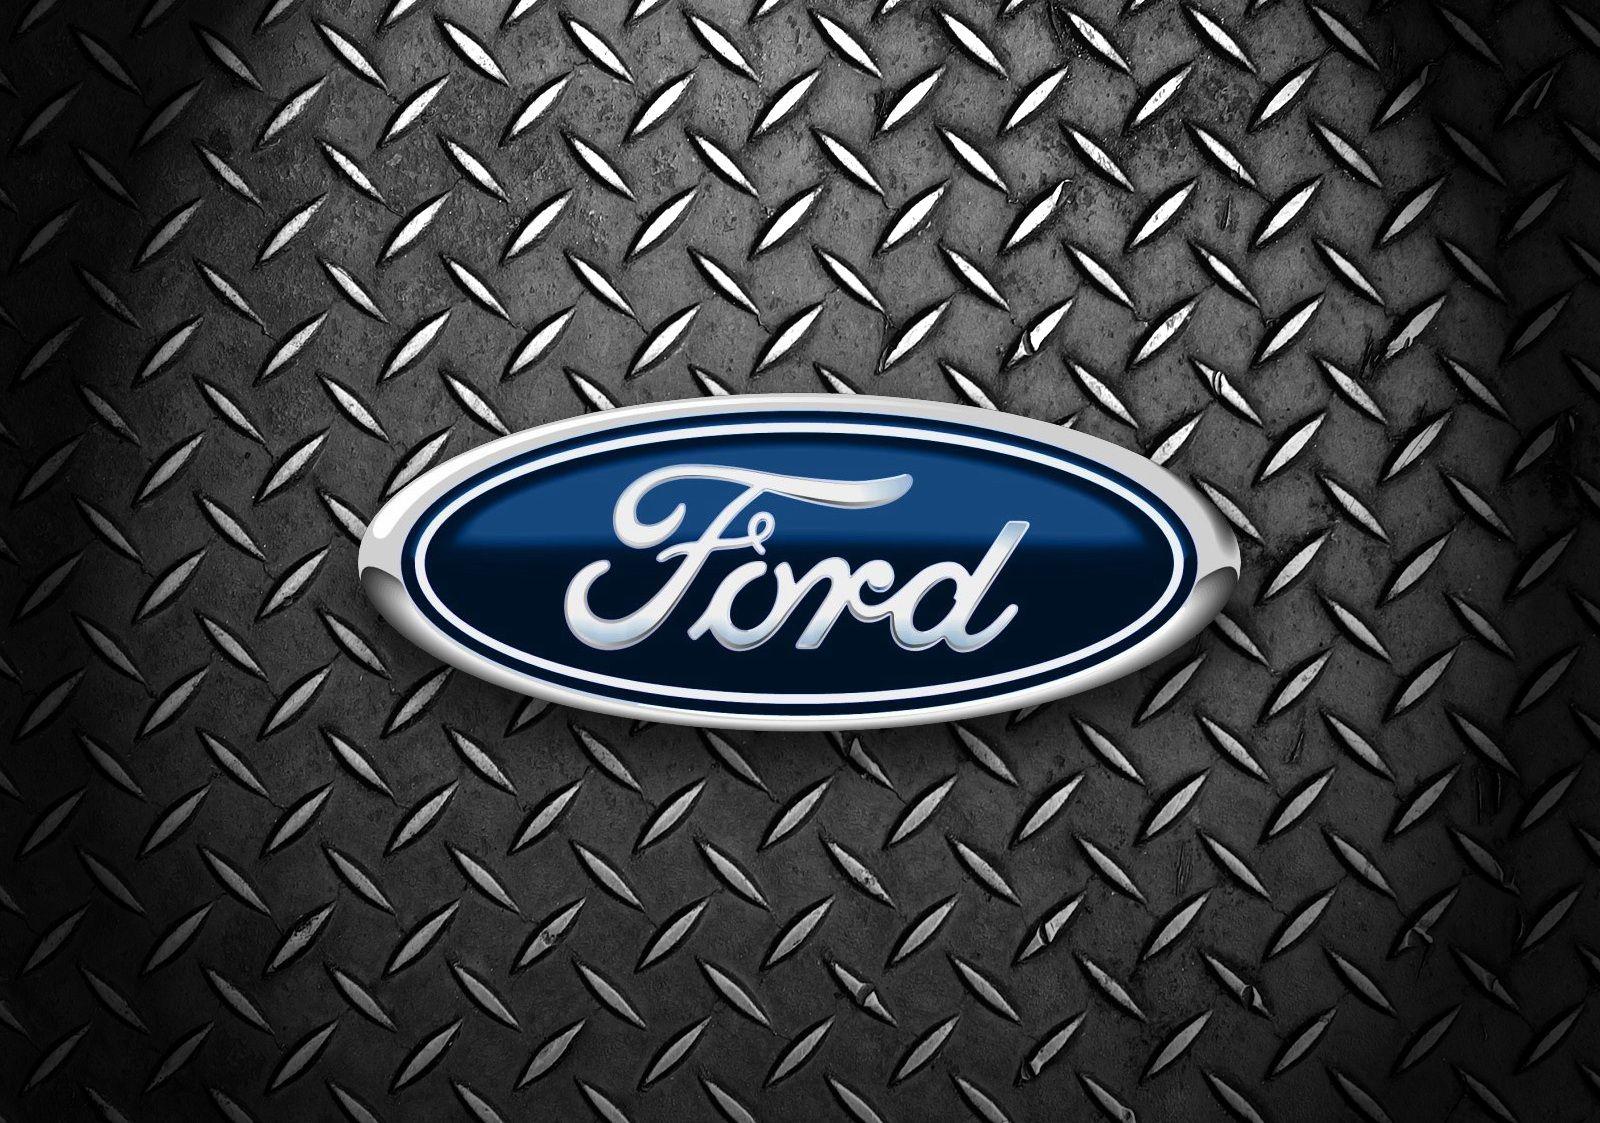 Blue Oval Car Logo - Ford Logo, Ford Car Symbol Meaning and History. Car Brand Names.com